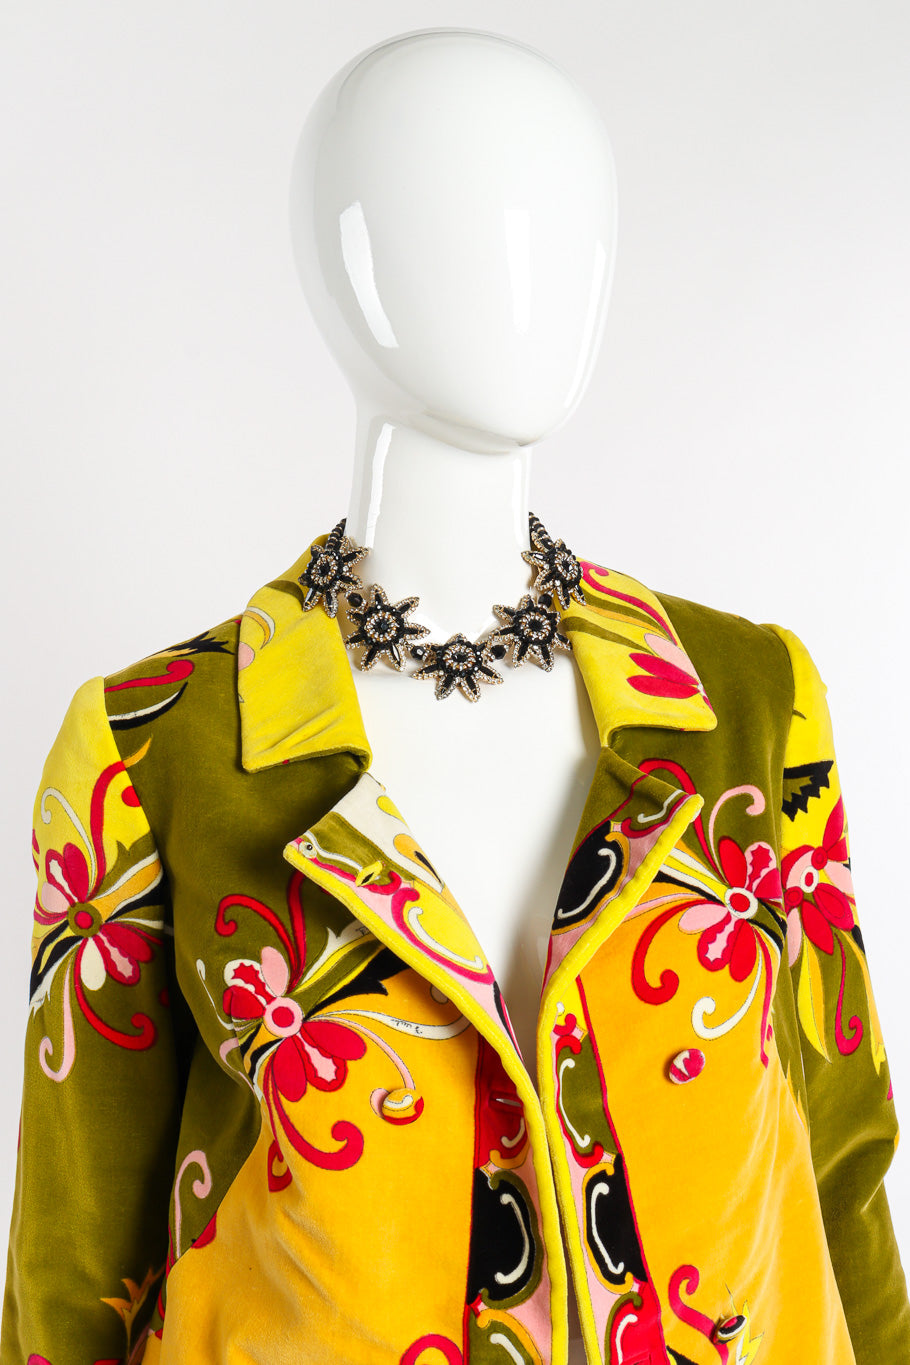 Vintage 3-Strand Beaded Flower Necklace on mannequin with Pucci jacket @Recessla